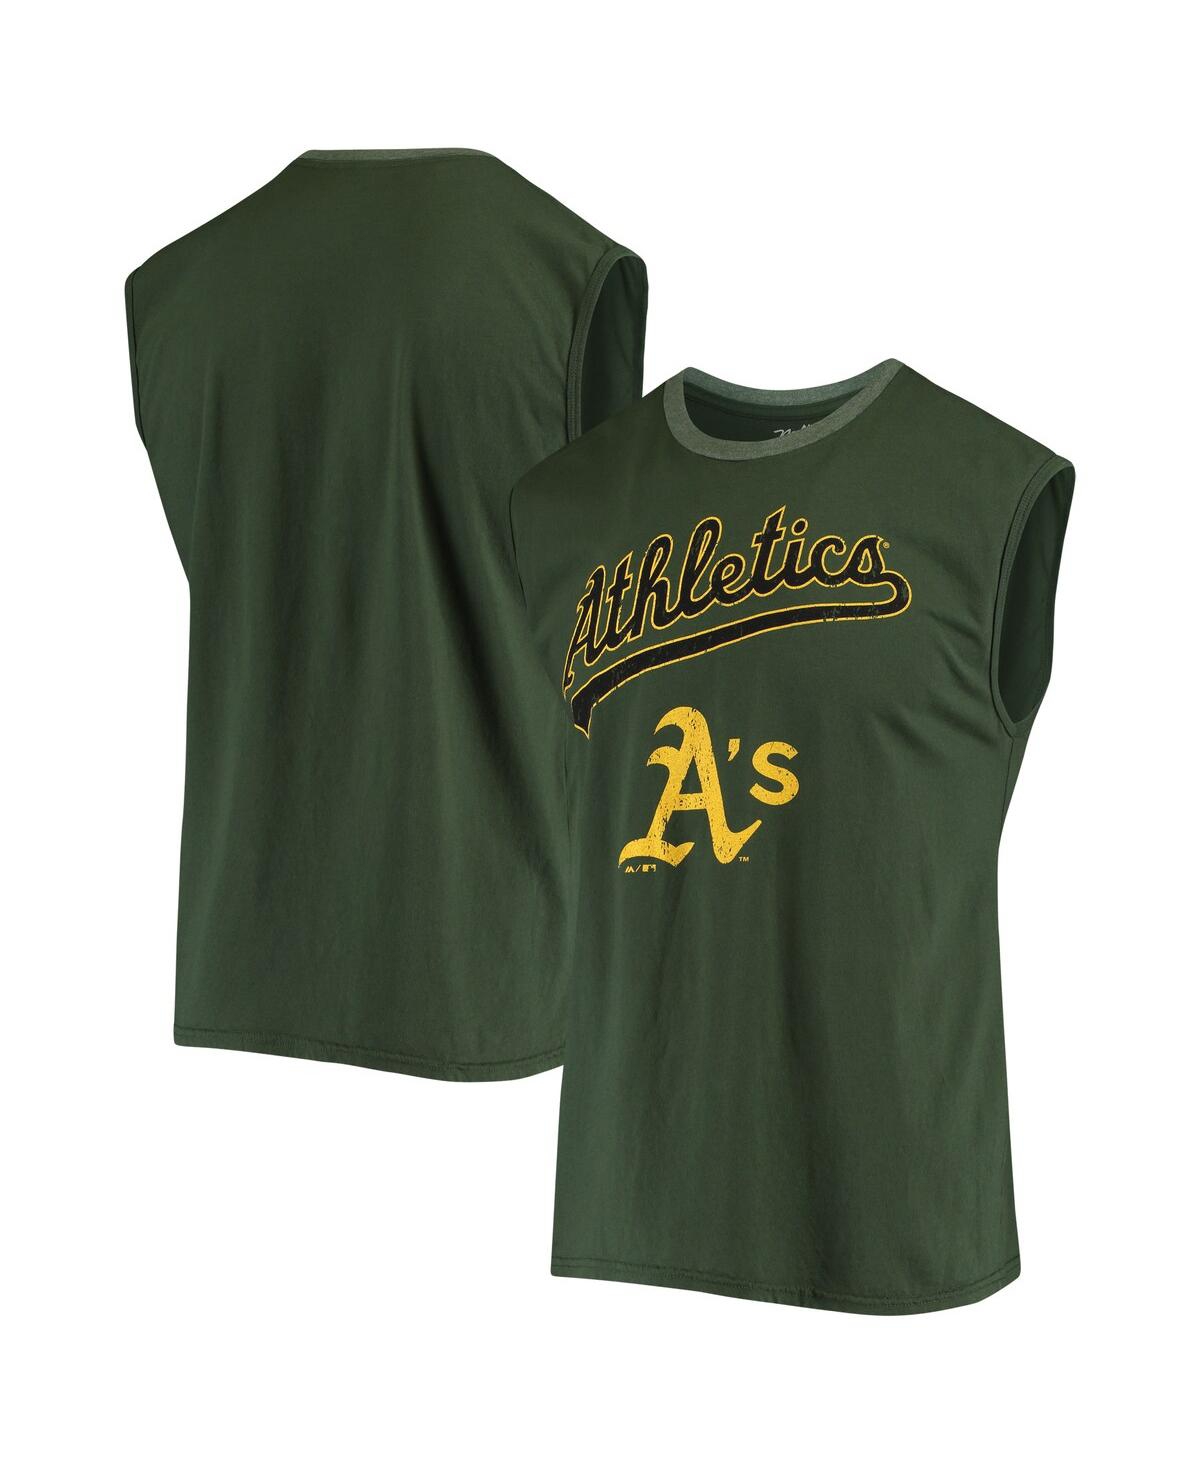 Men's Majestic Threads Green Oakland Athletics Softhand Muscle Tank Top - Green